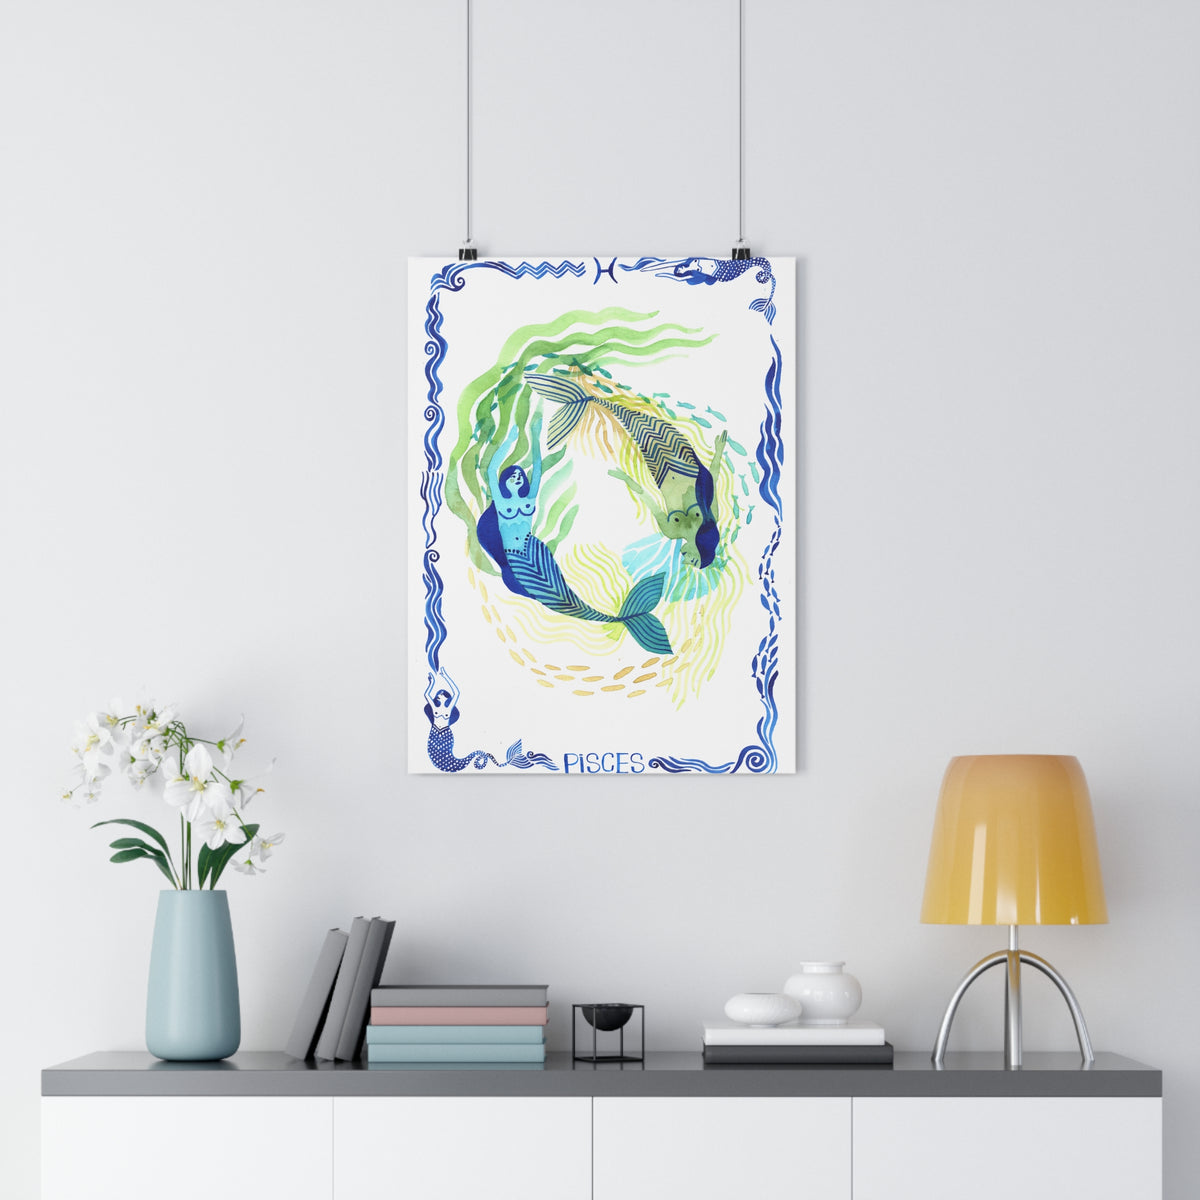 Mystical Waters: Pisces Giclee Print